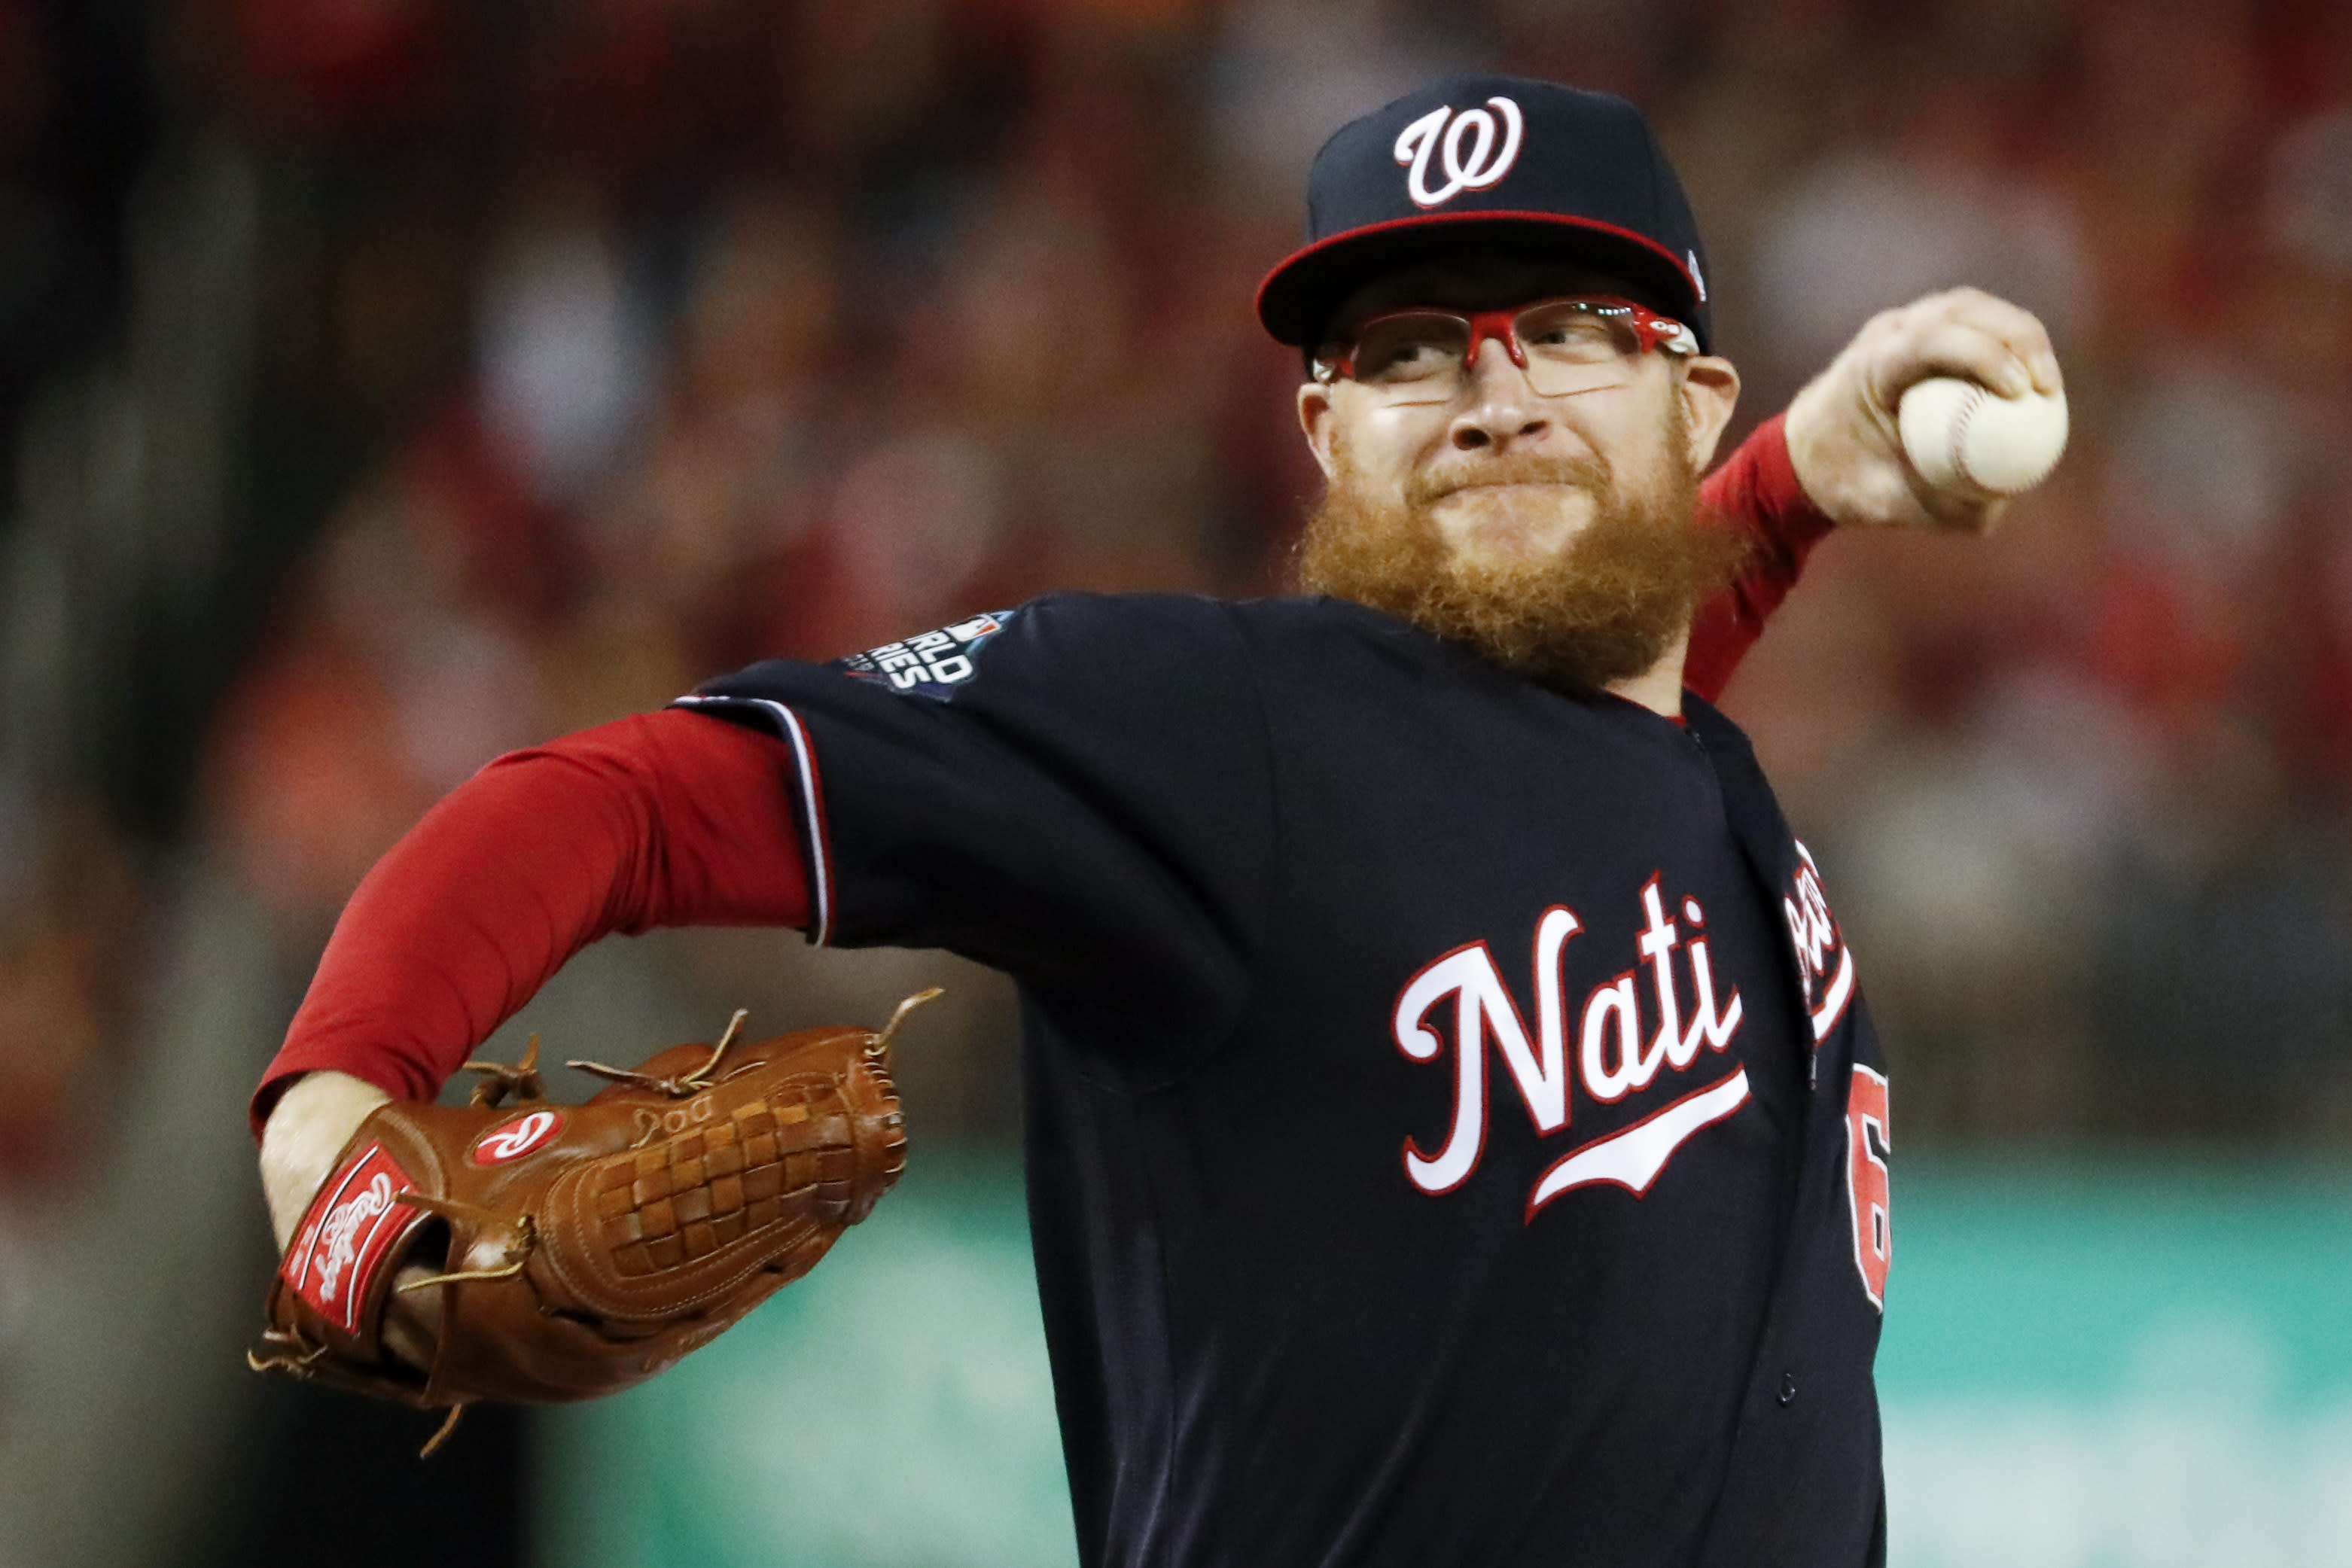 Nationals closer Sean Doolittle opts out of White House trip